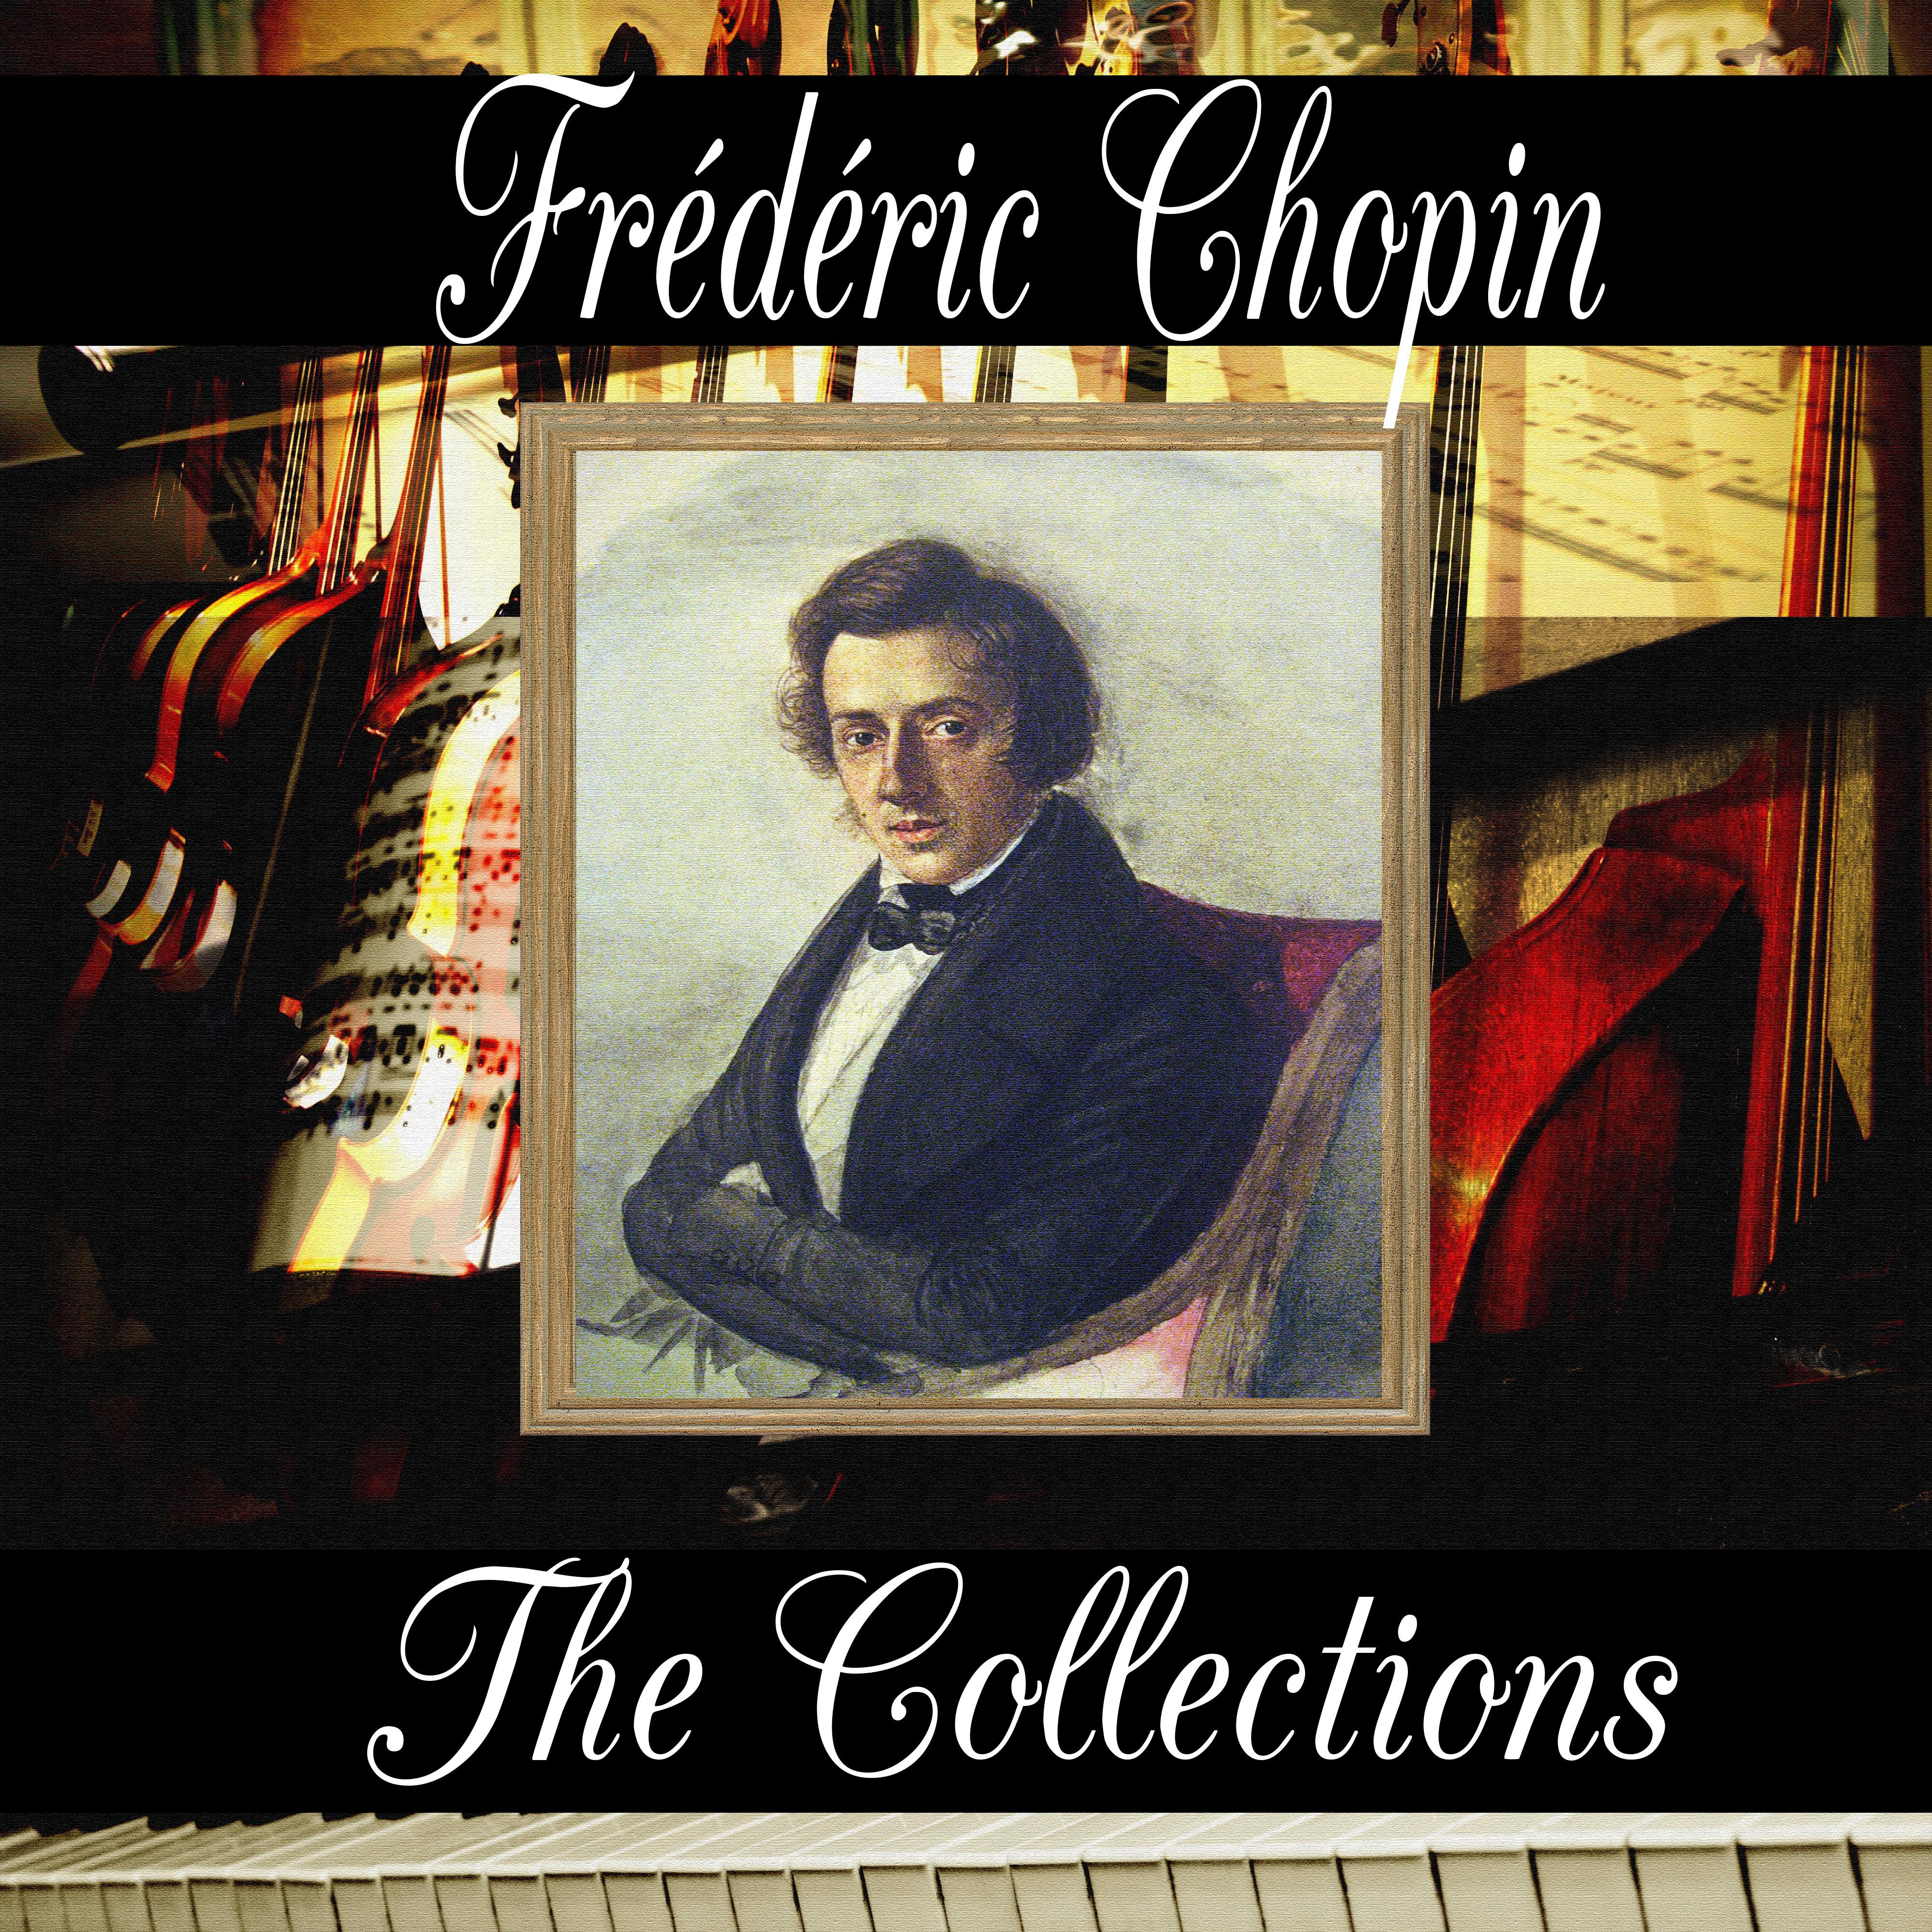 Fre de ric Chopin: The Collection